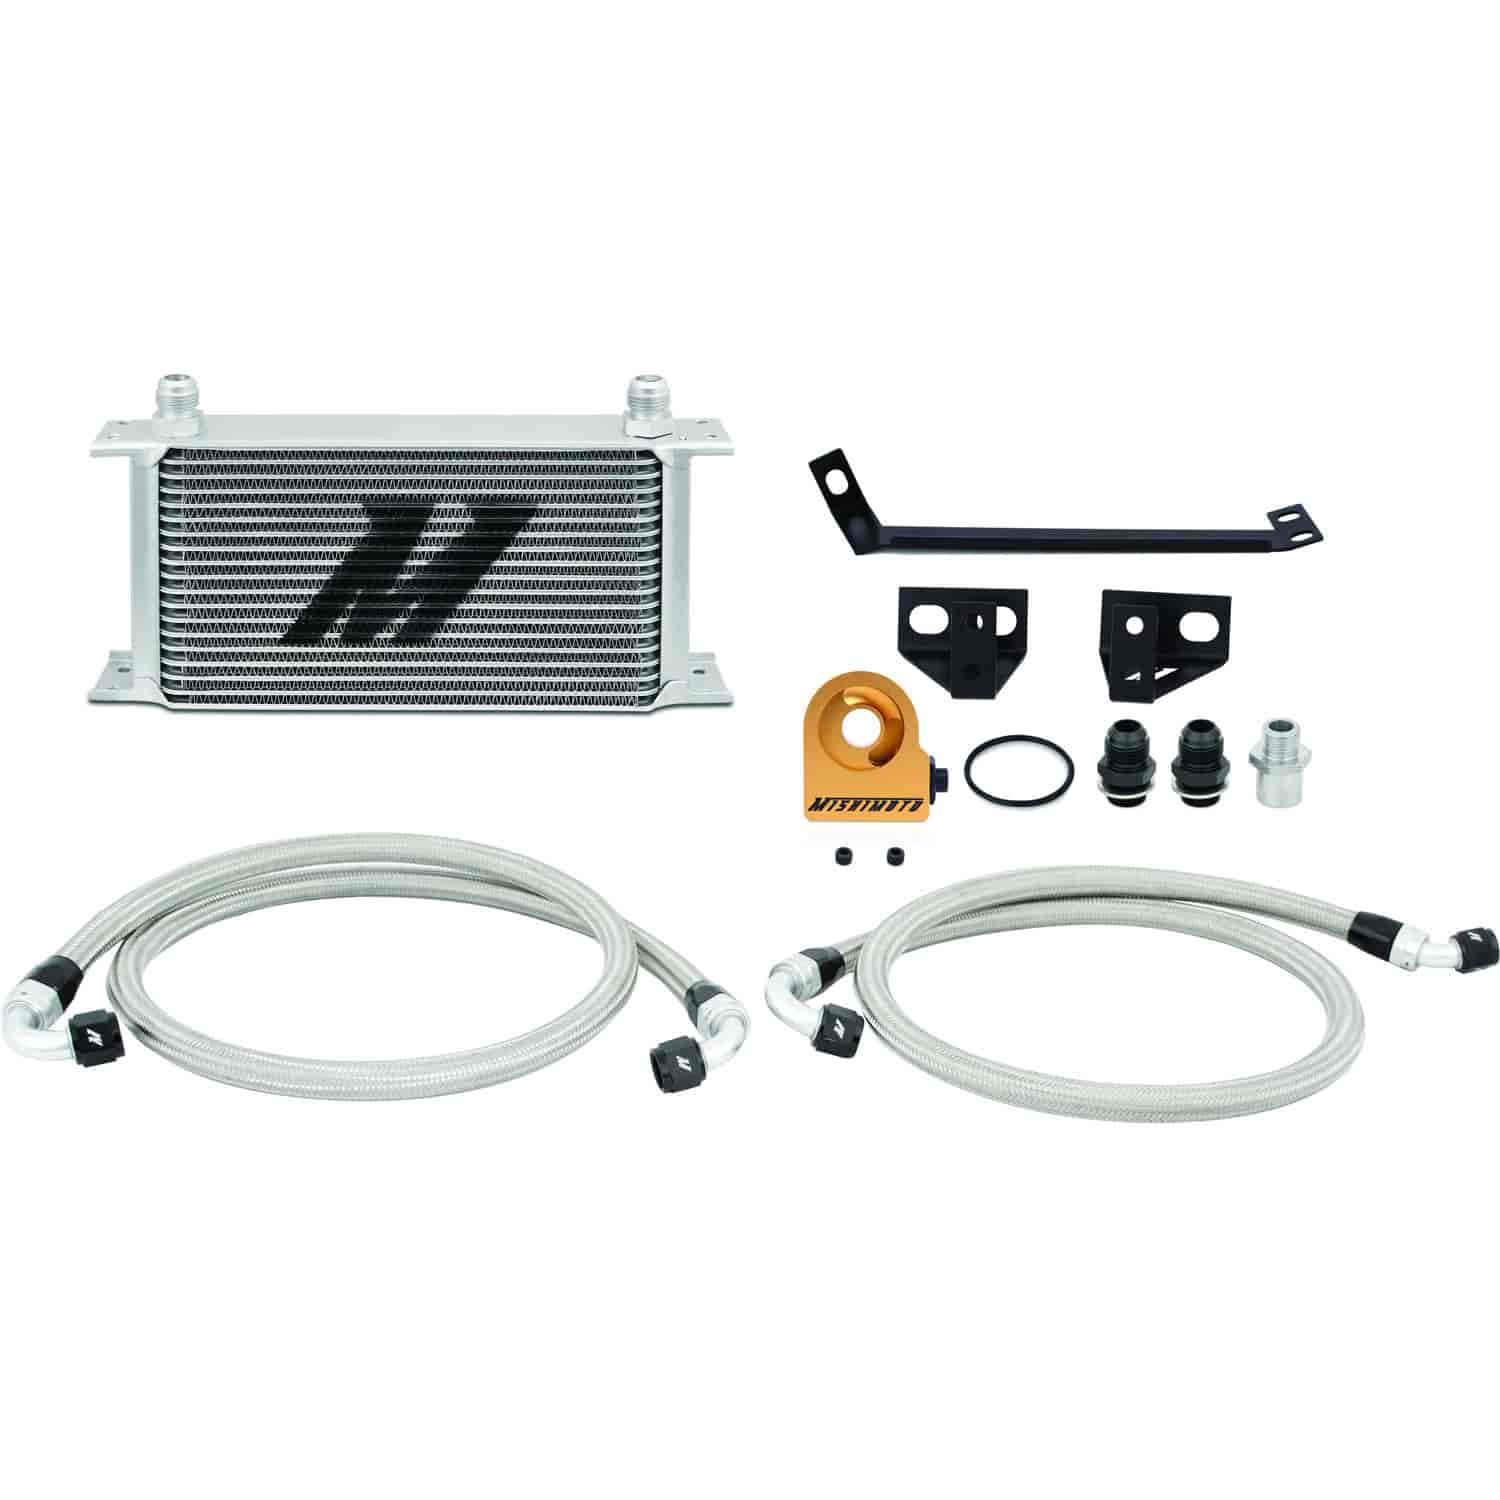 Ford Mustang EcoBoost Thermostatic Oil Cooler Kit - MFG Part No. MMOC-MUS4-15T